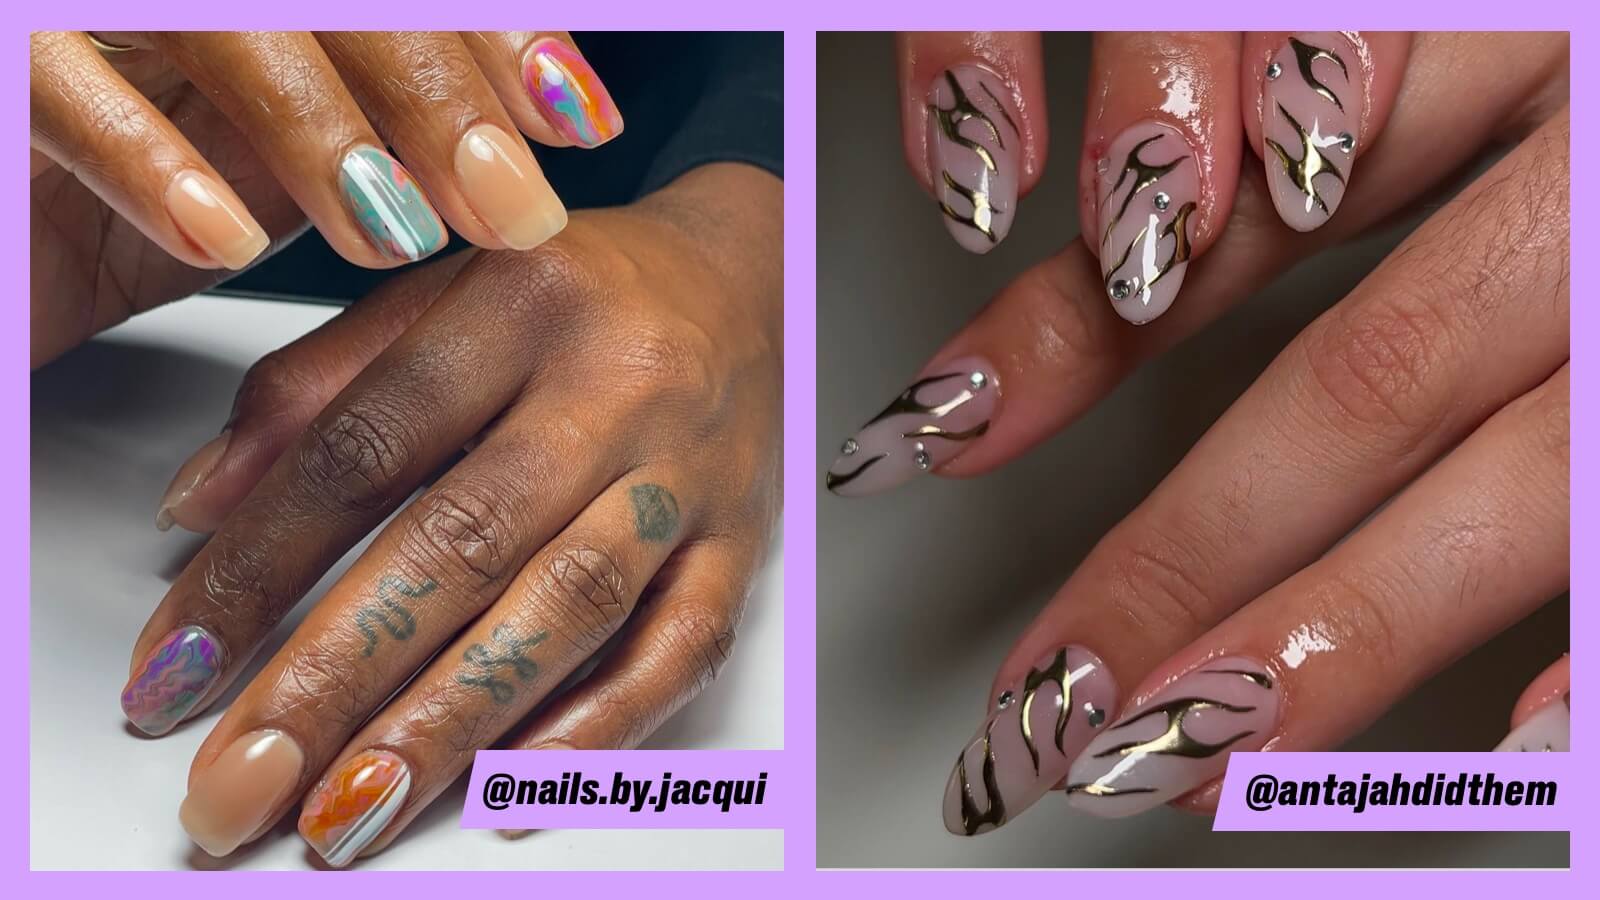 6 Nail Art Designs With Just 1 Nail Polish – DeBelle Cosmetix Online Store